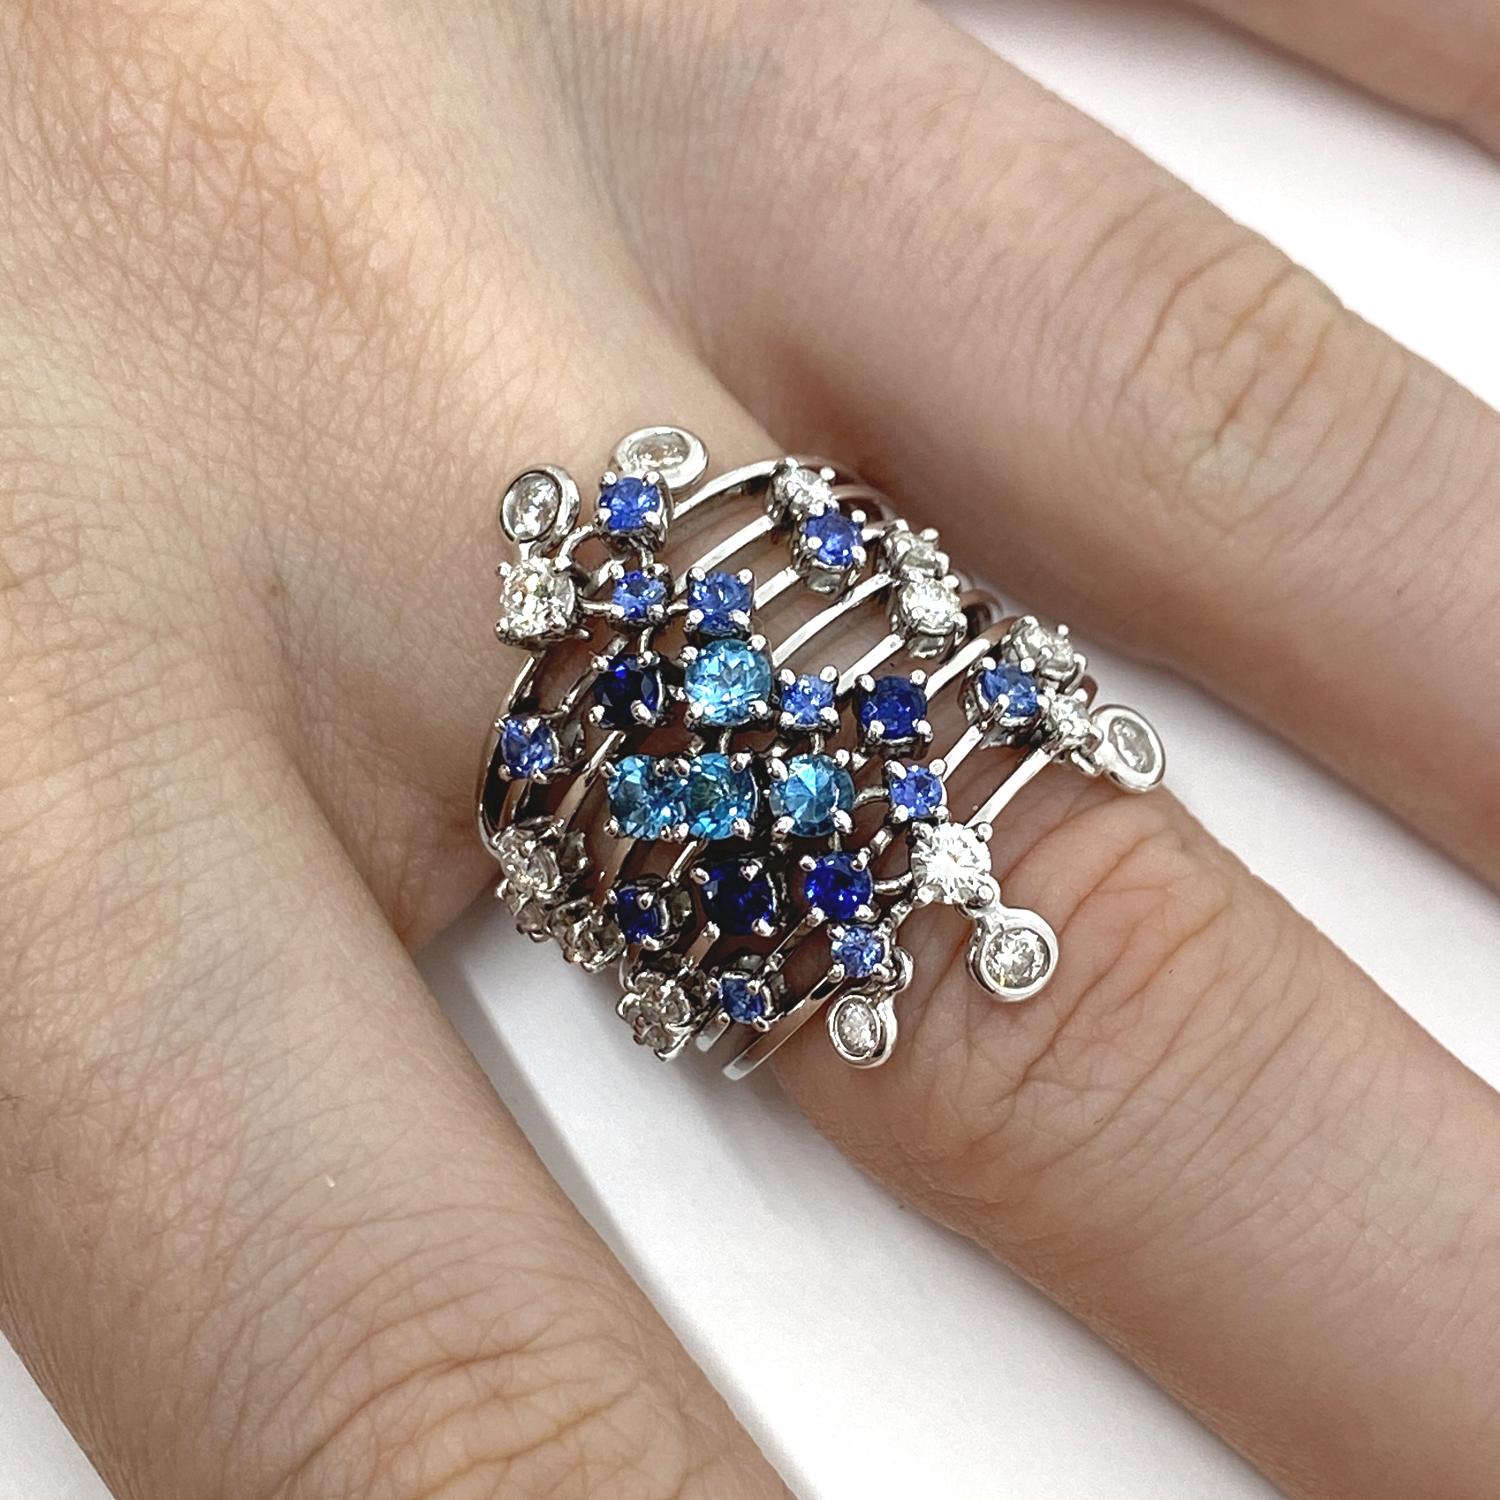 Ring made of eight 18kt white gold bands with natural brilliant-cut sapphires for ct.0.83 and white diamonds for ct.0.77 and topazes for ct .0.50

Welcome to our jewelry collection, where every piece tells a story of timeless elegance and